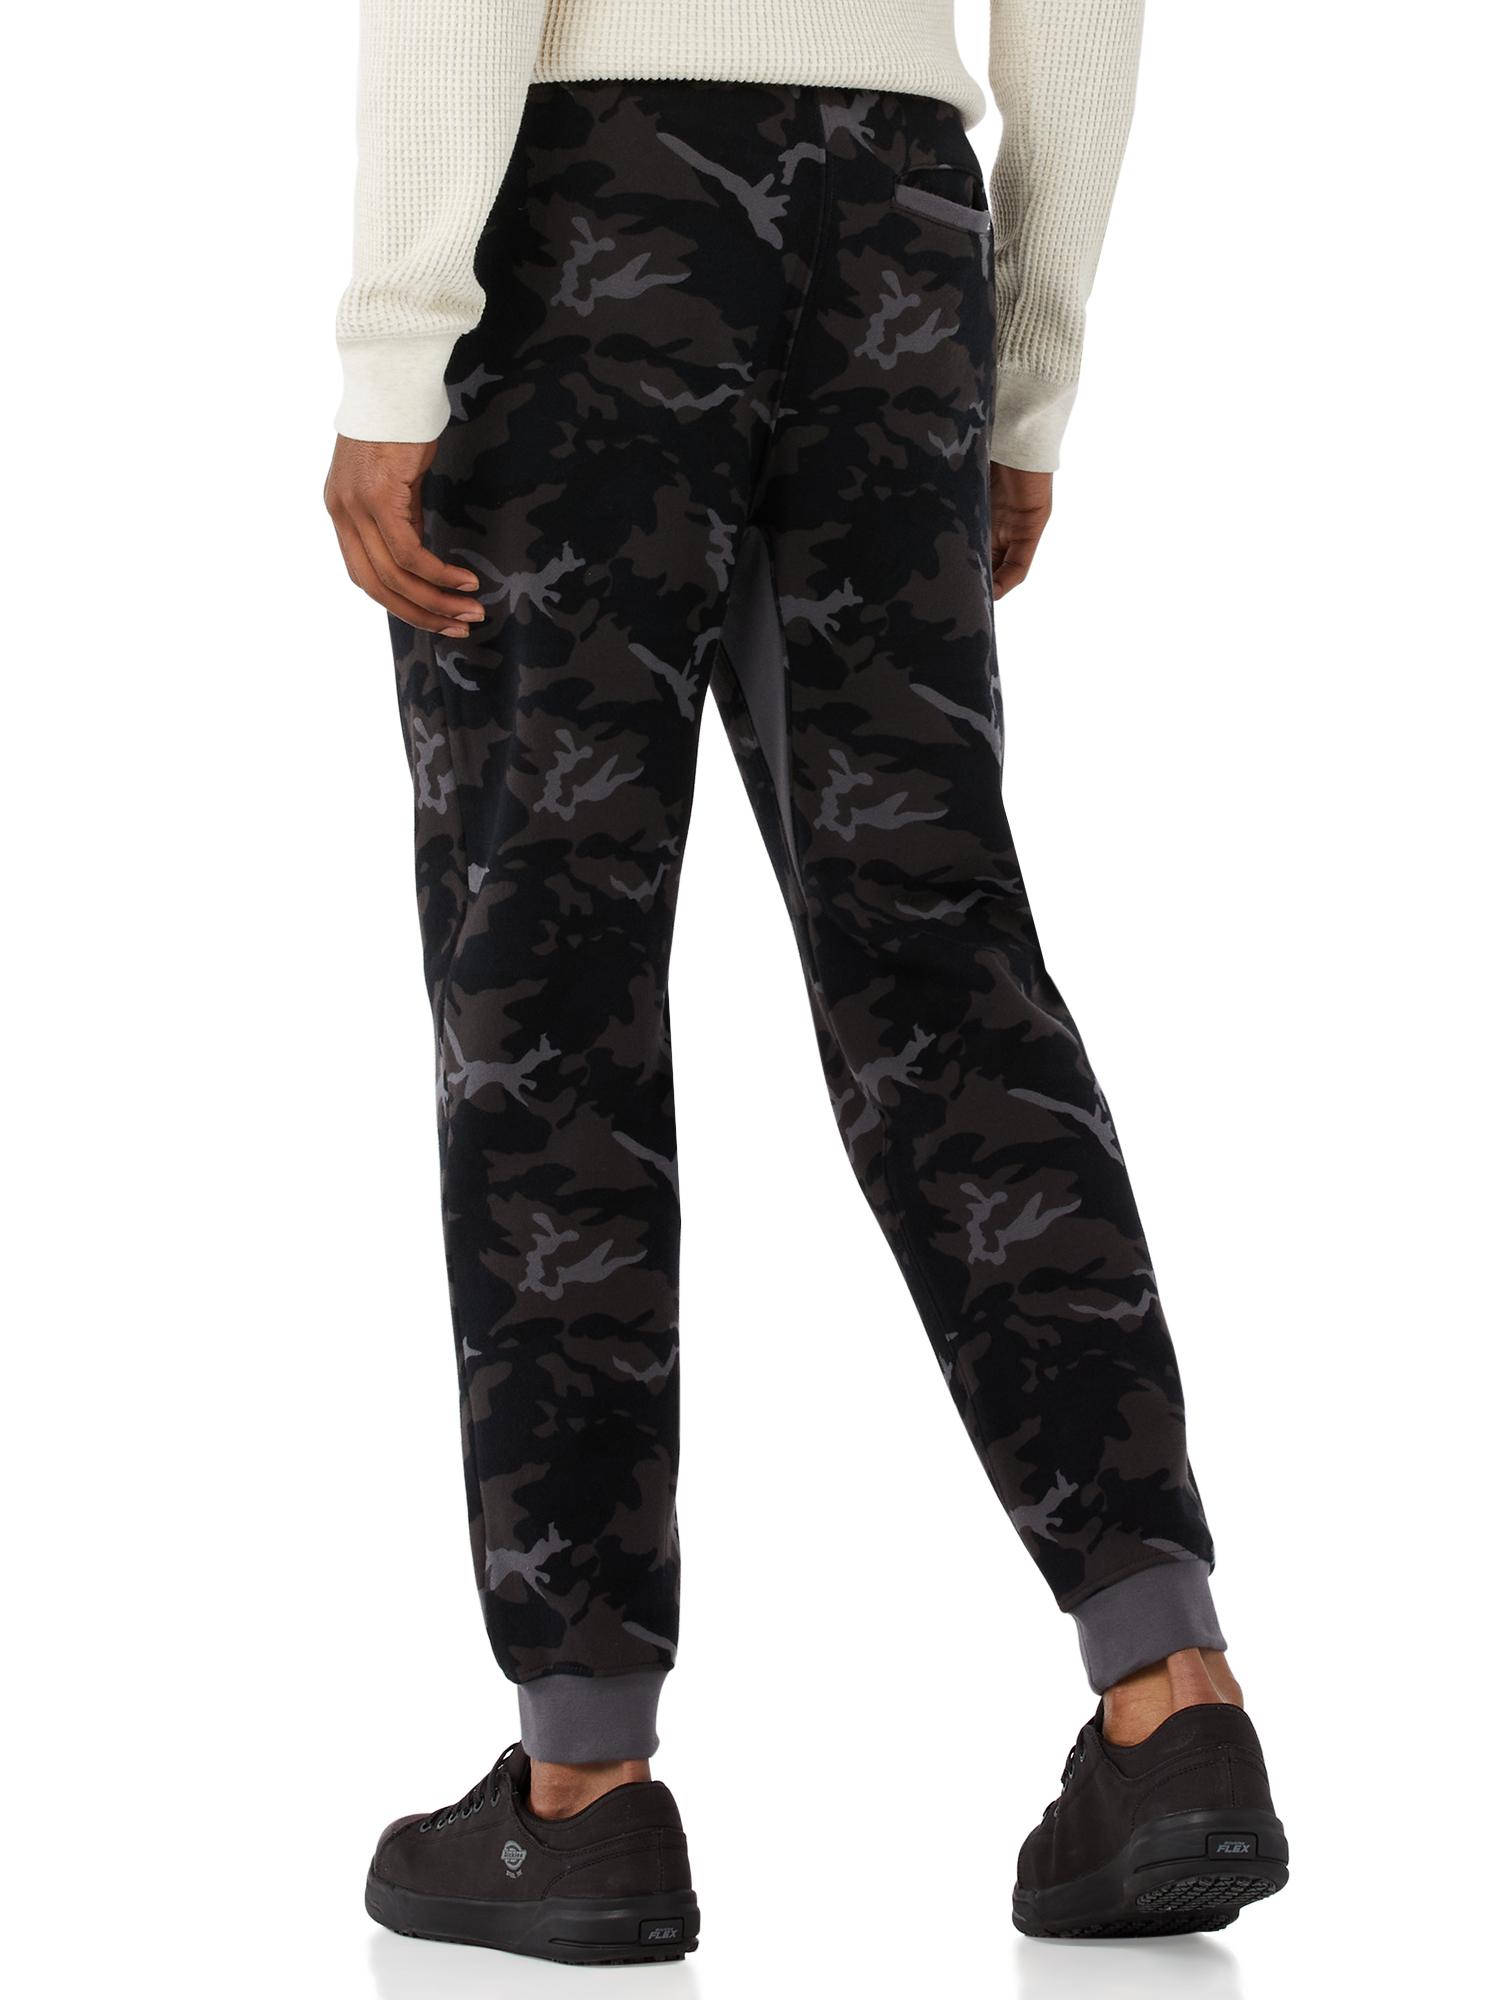 Free Assembly Men's Everyday Fleece Pant - Jogger - image 2 of 6